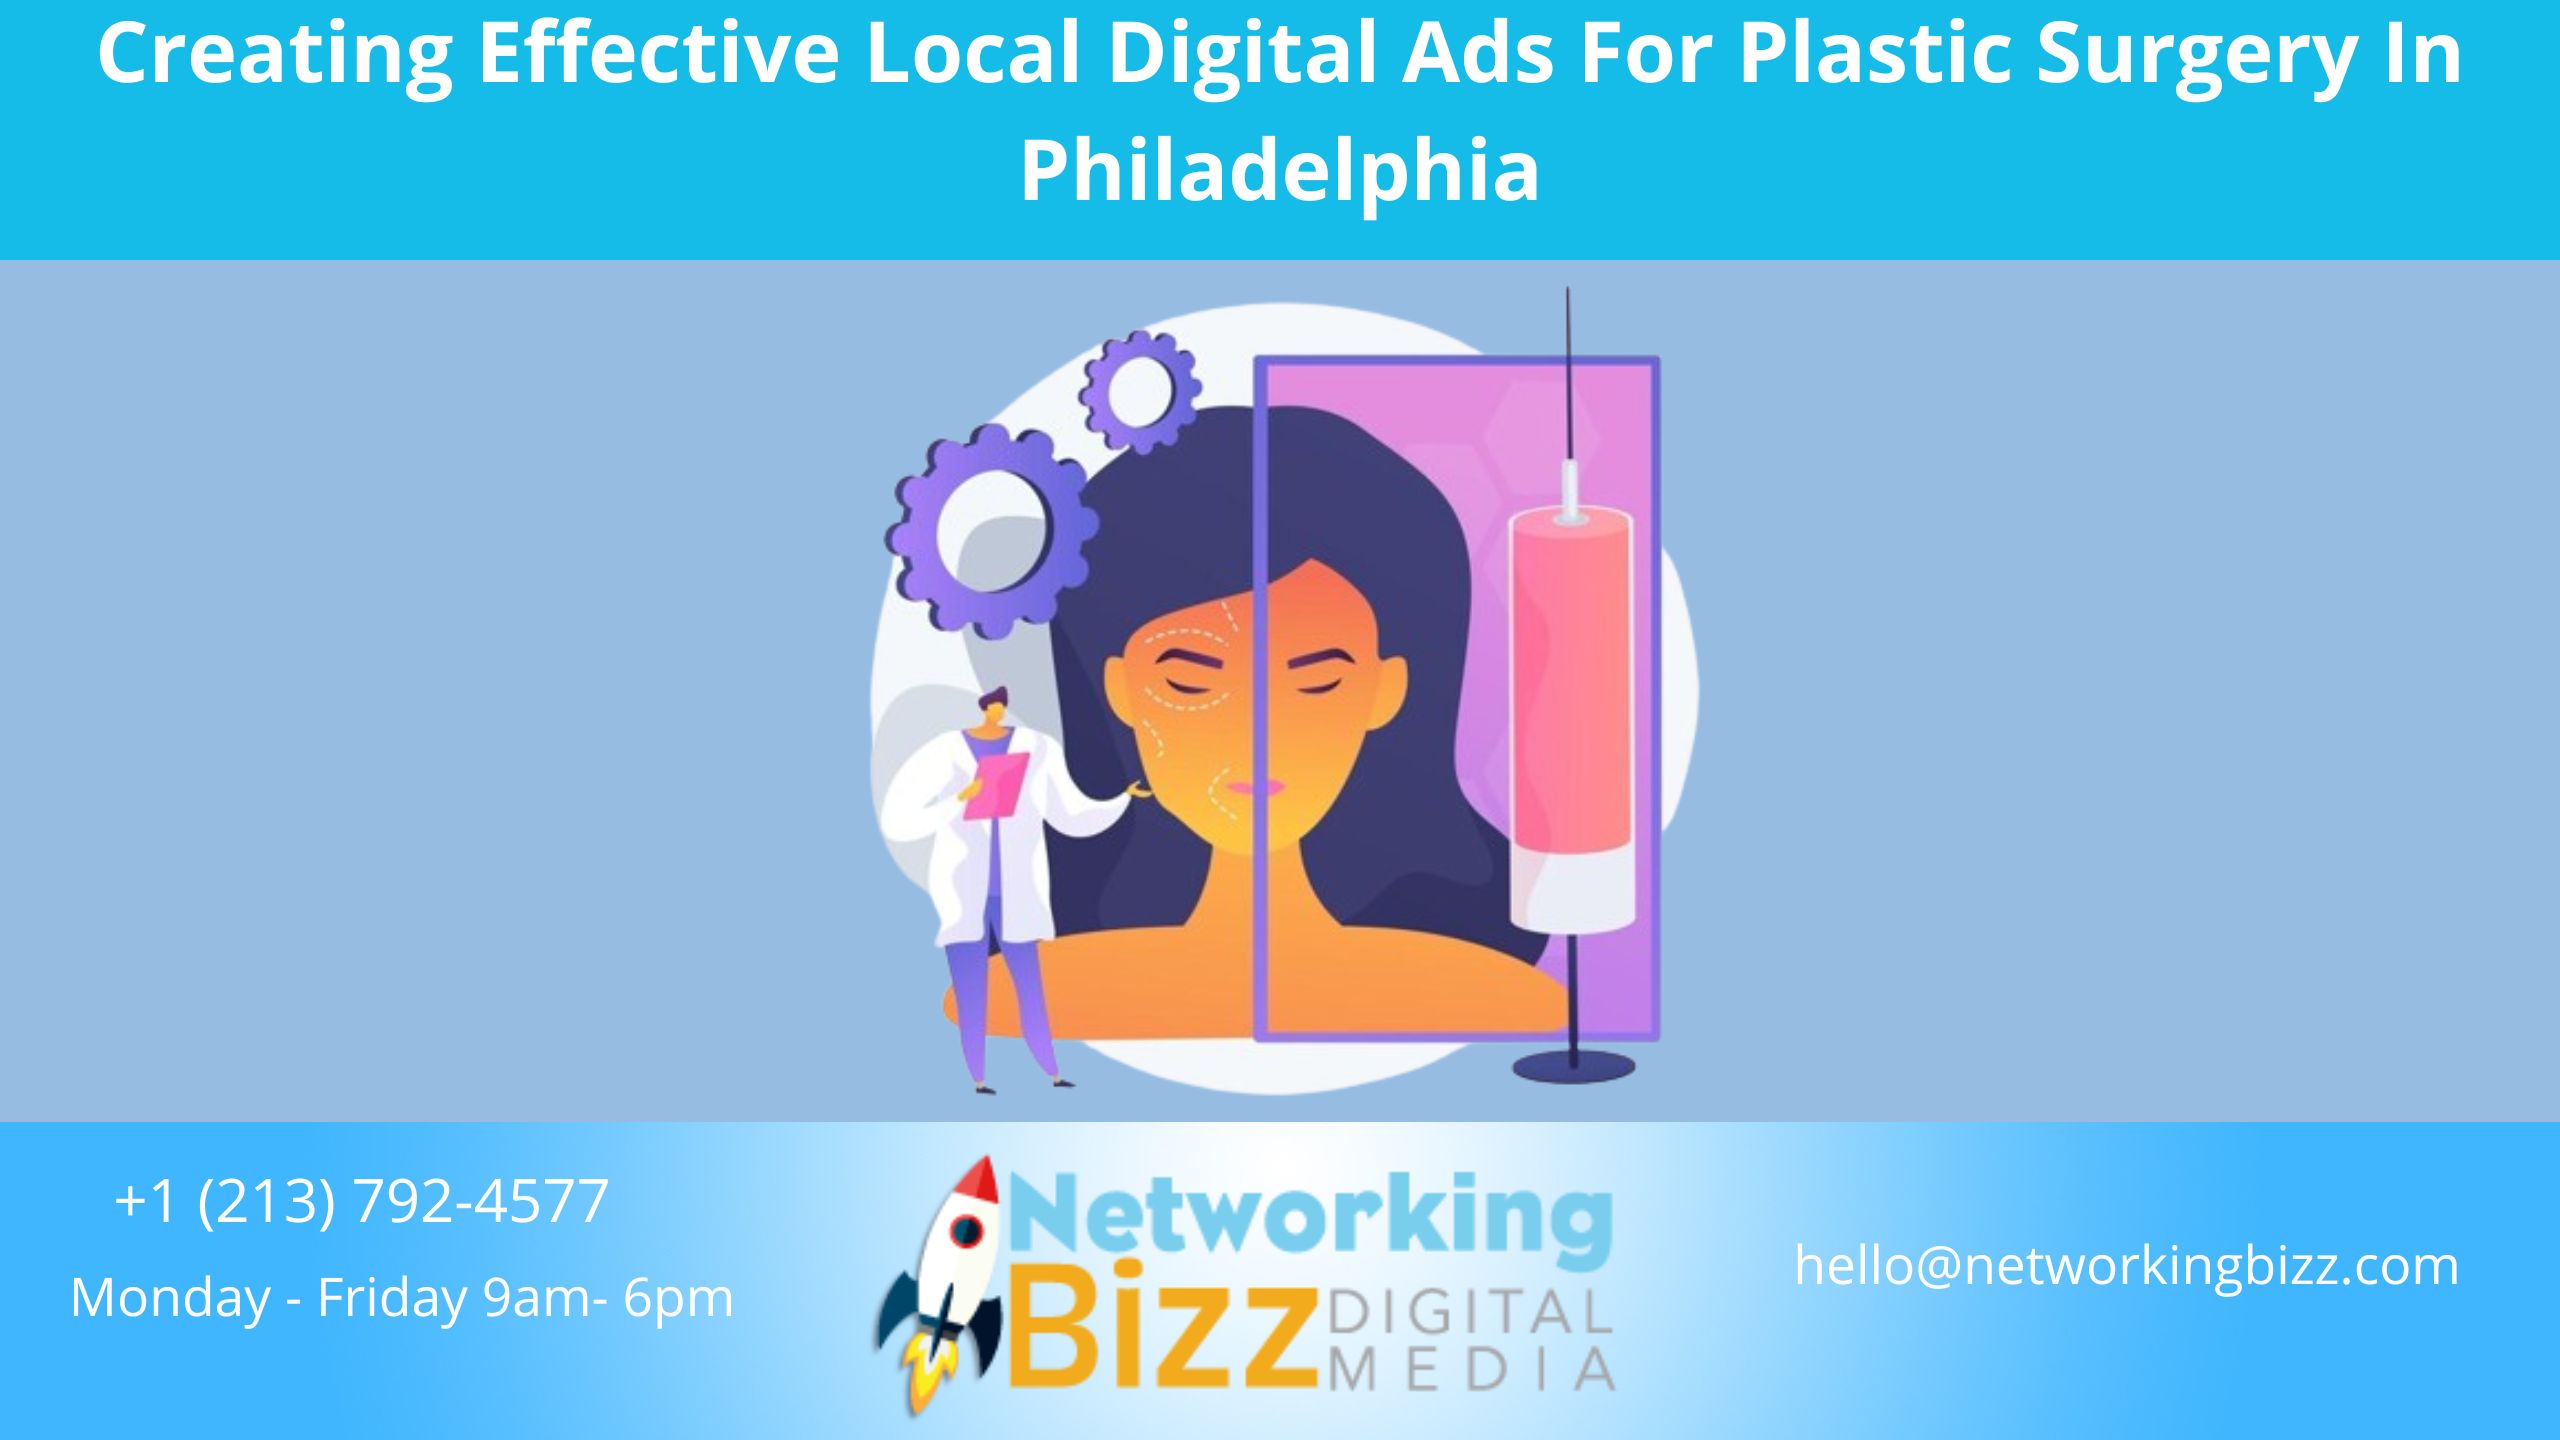 Creating Effective Local Digital Ads For Plastic Surgery In Philadelphia